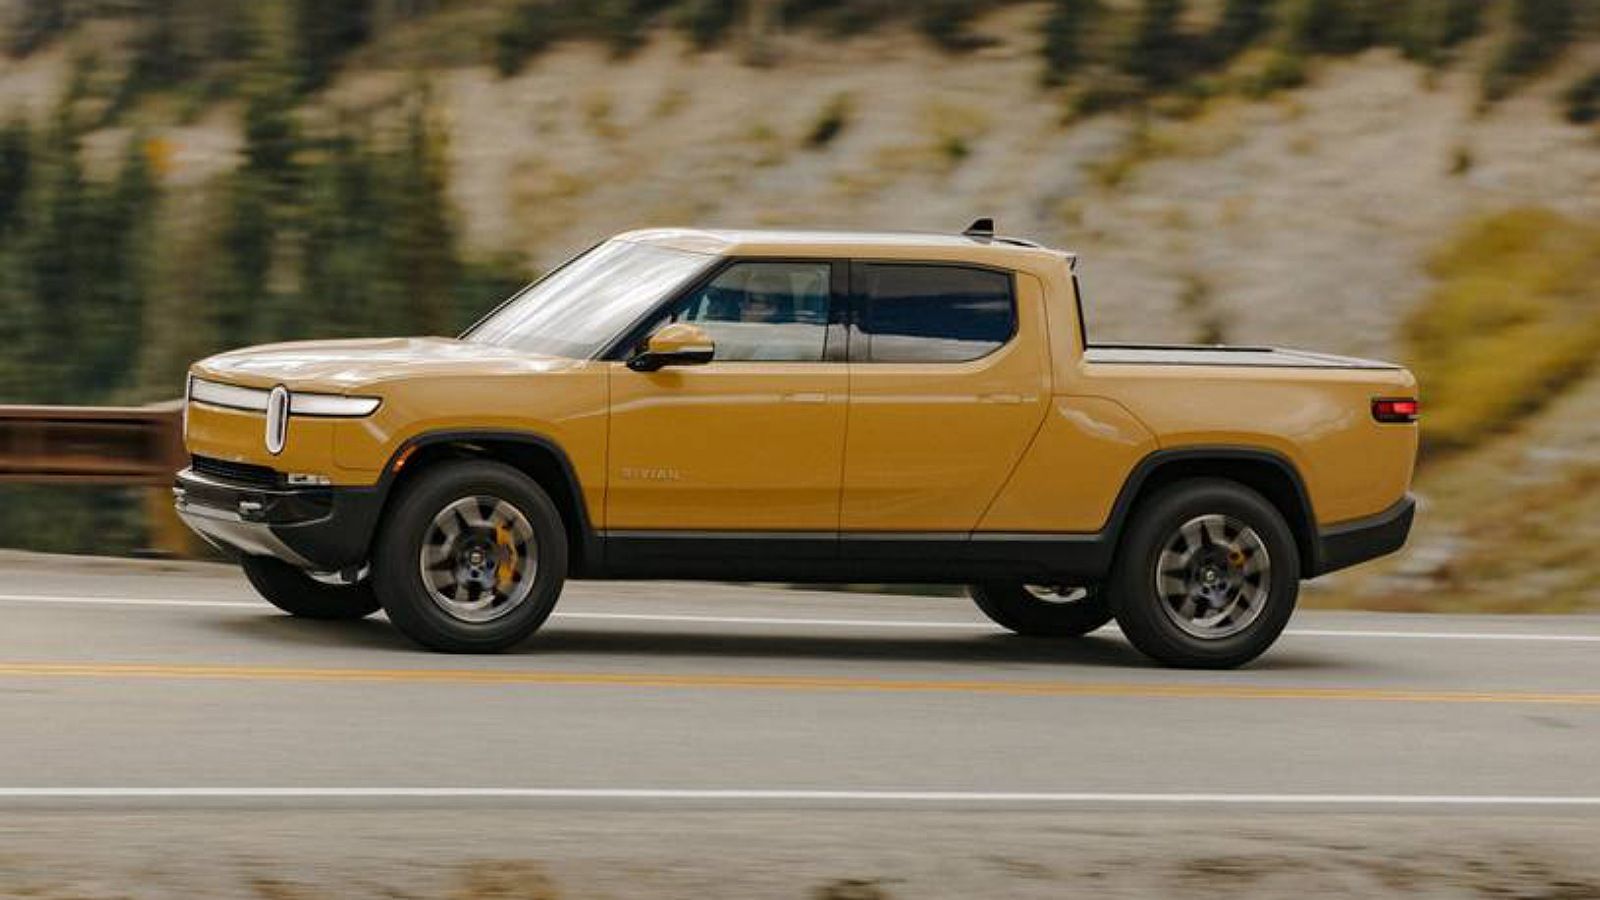 Why is the Rivian R1T a game changer?